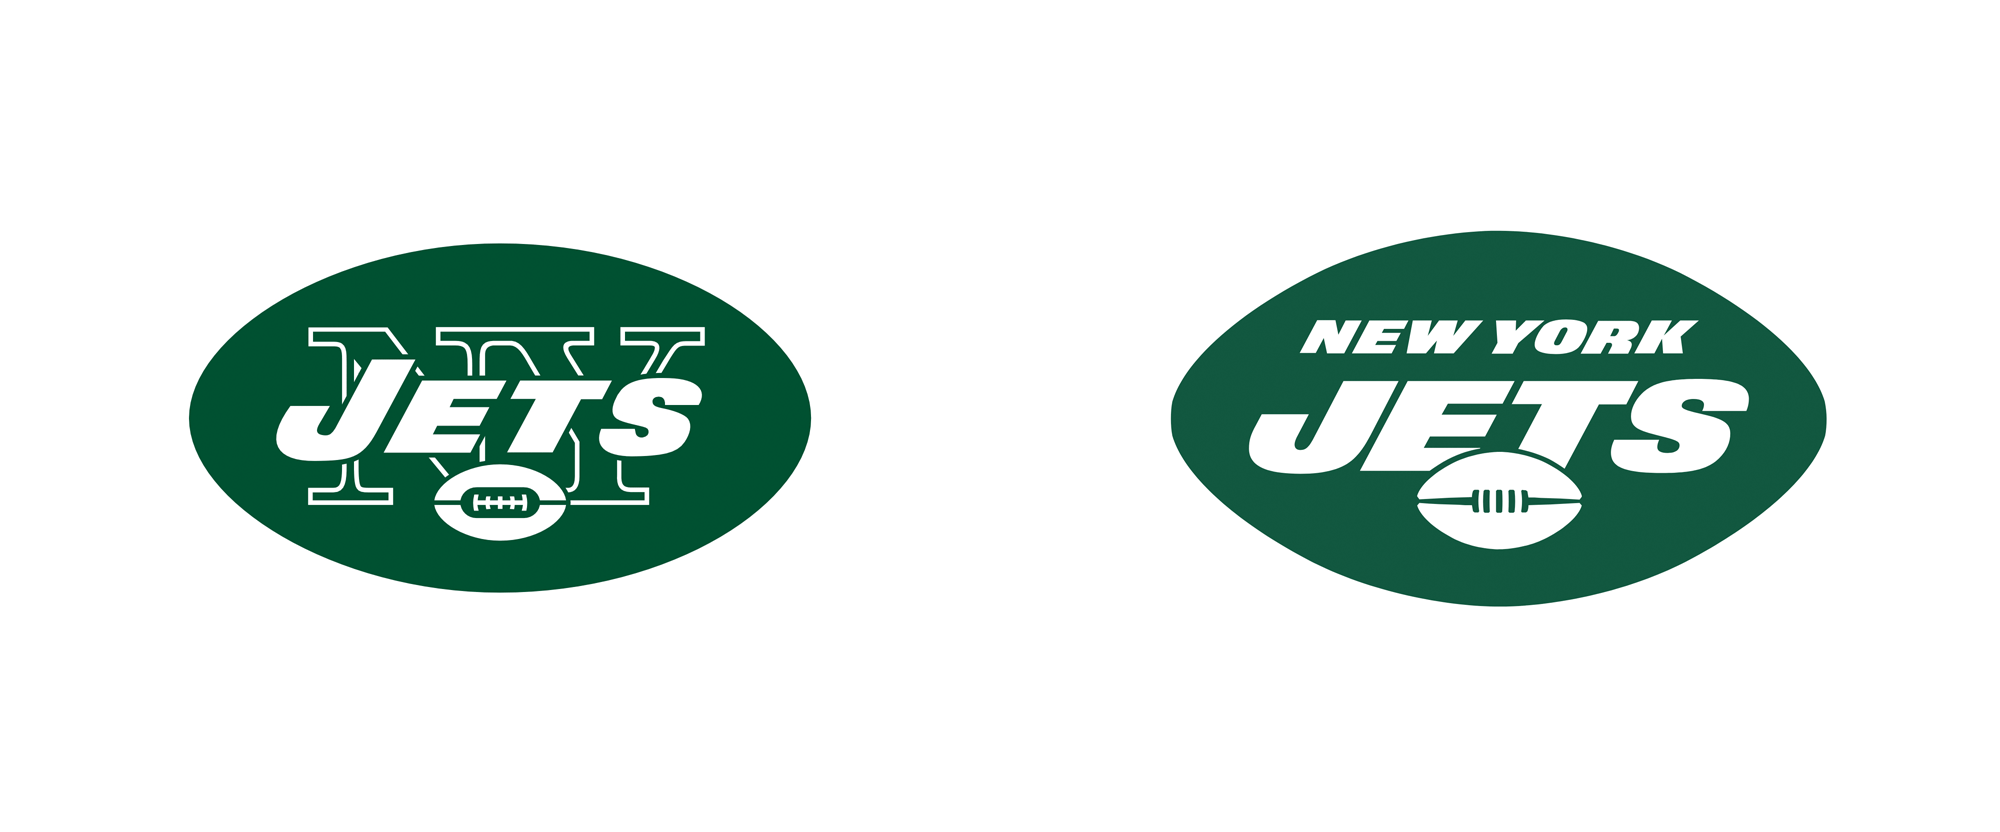 Jets Logo Official Site Of The New York Jets Originally founded in